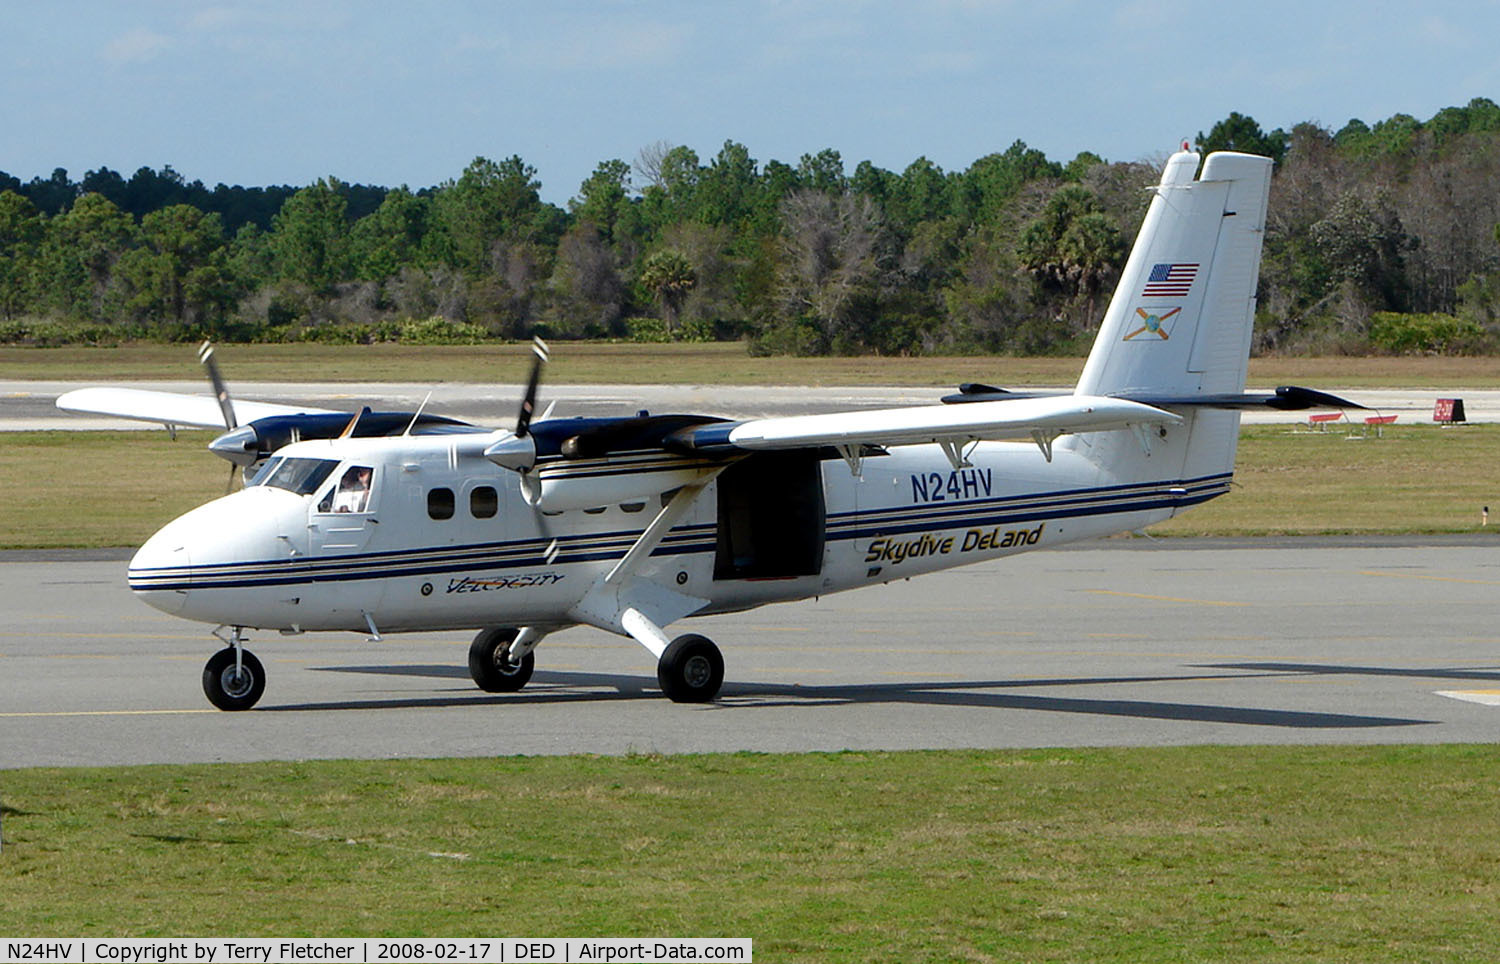 N24HV, 1968 De Havilland Canada DHC-6-100 Twin Otter C/N 109, This Twin Otter is used as a Skydiving platform at Deland , Florida